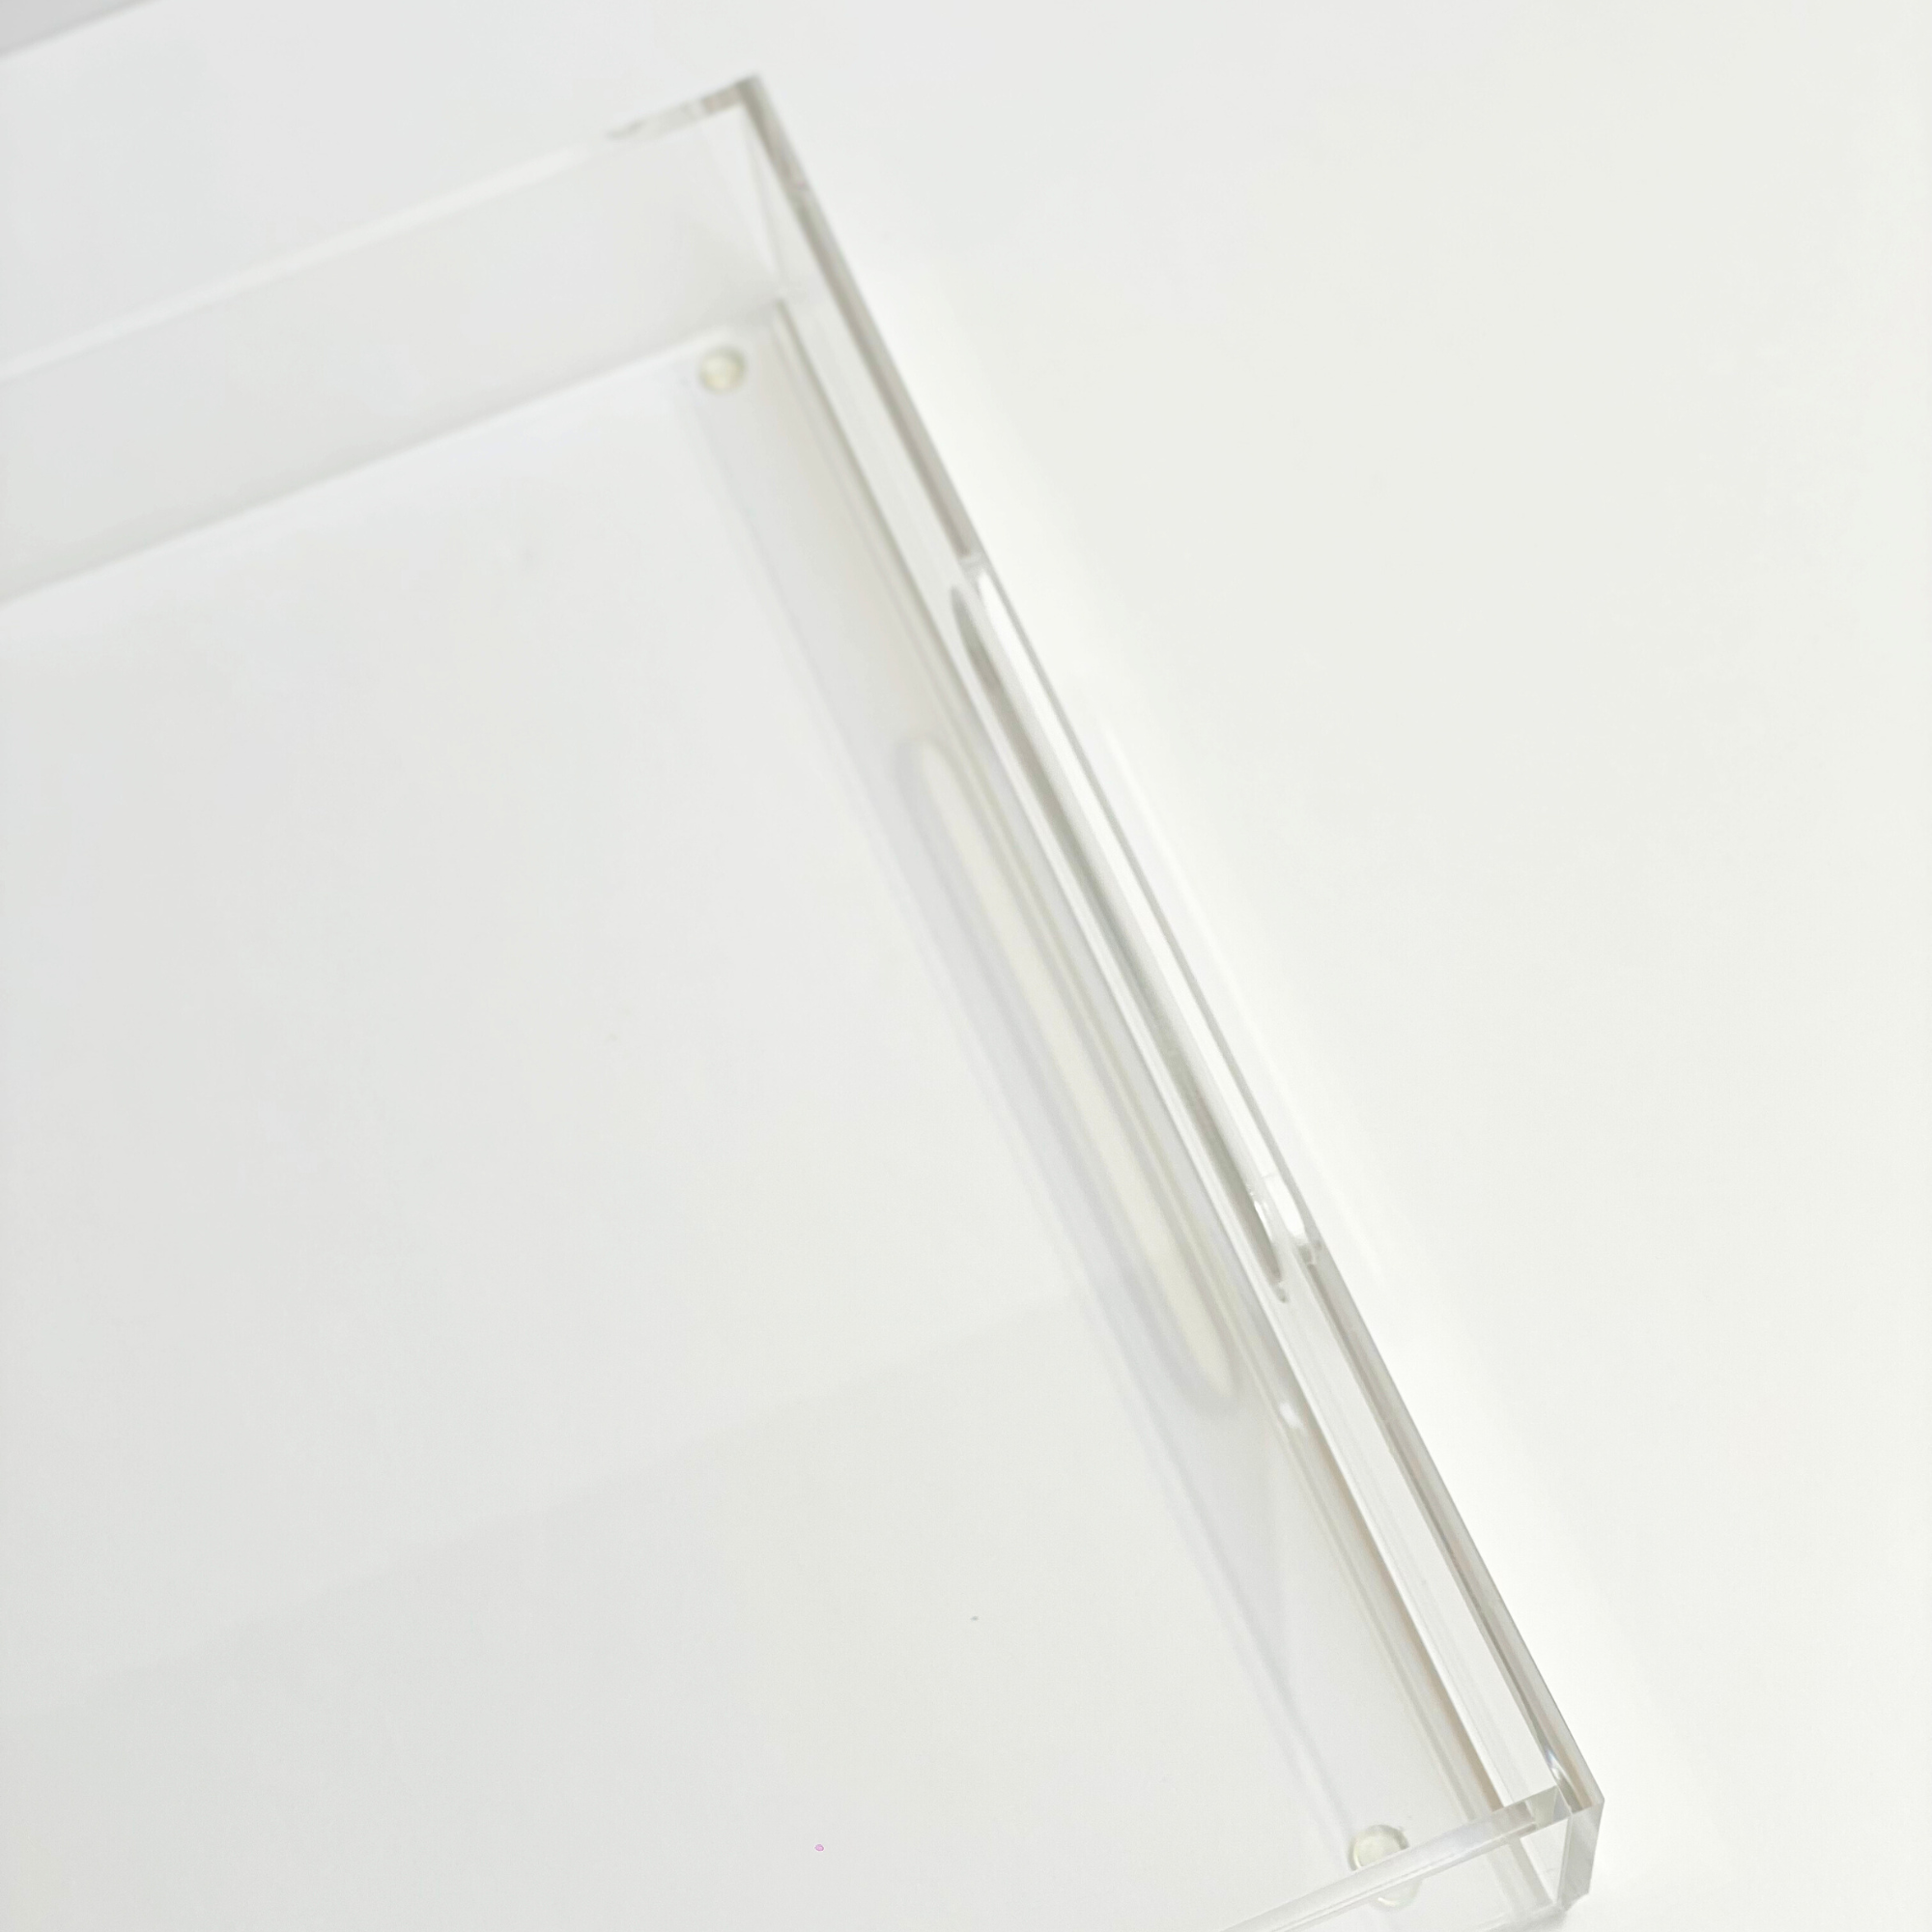 Jack of all Trays - Clear Acrylic – Statement Home